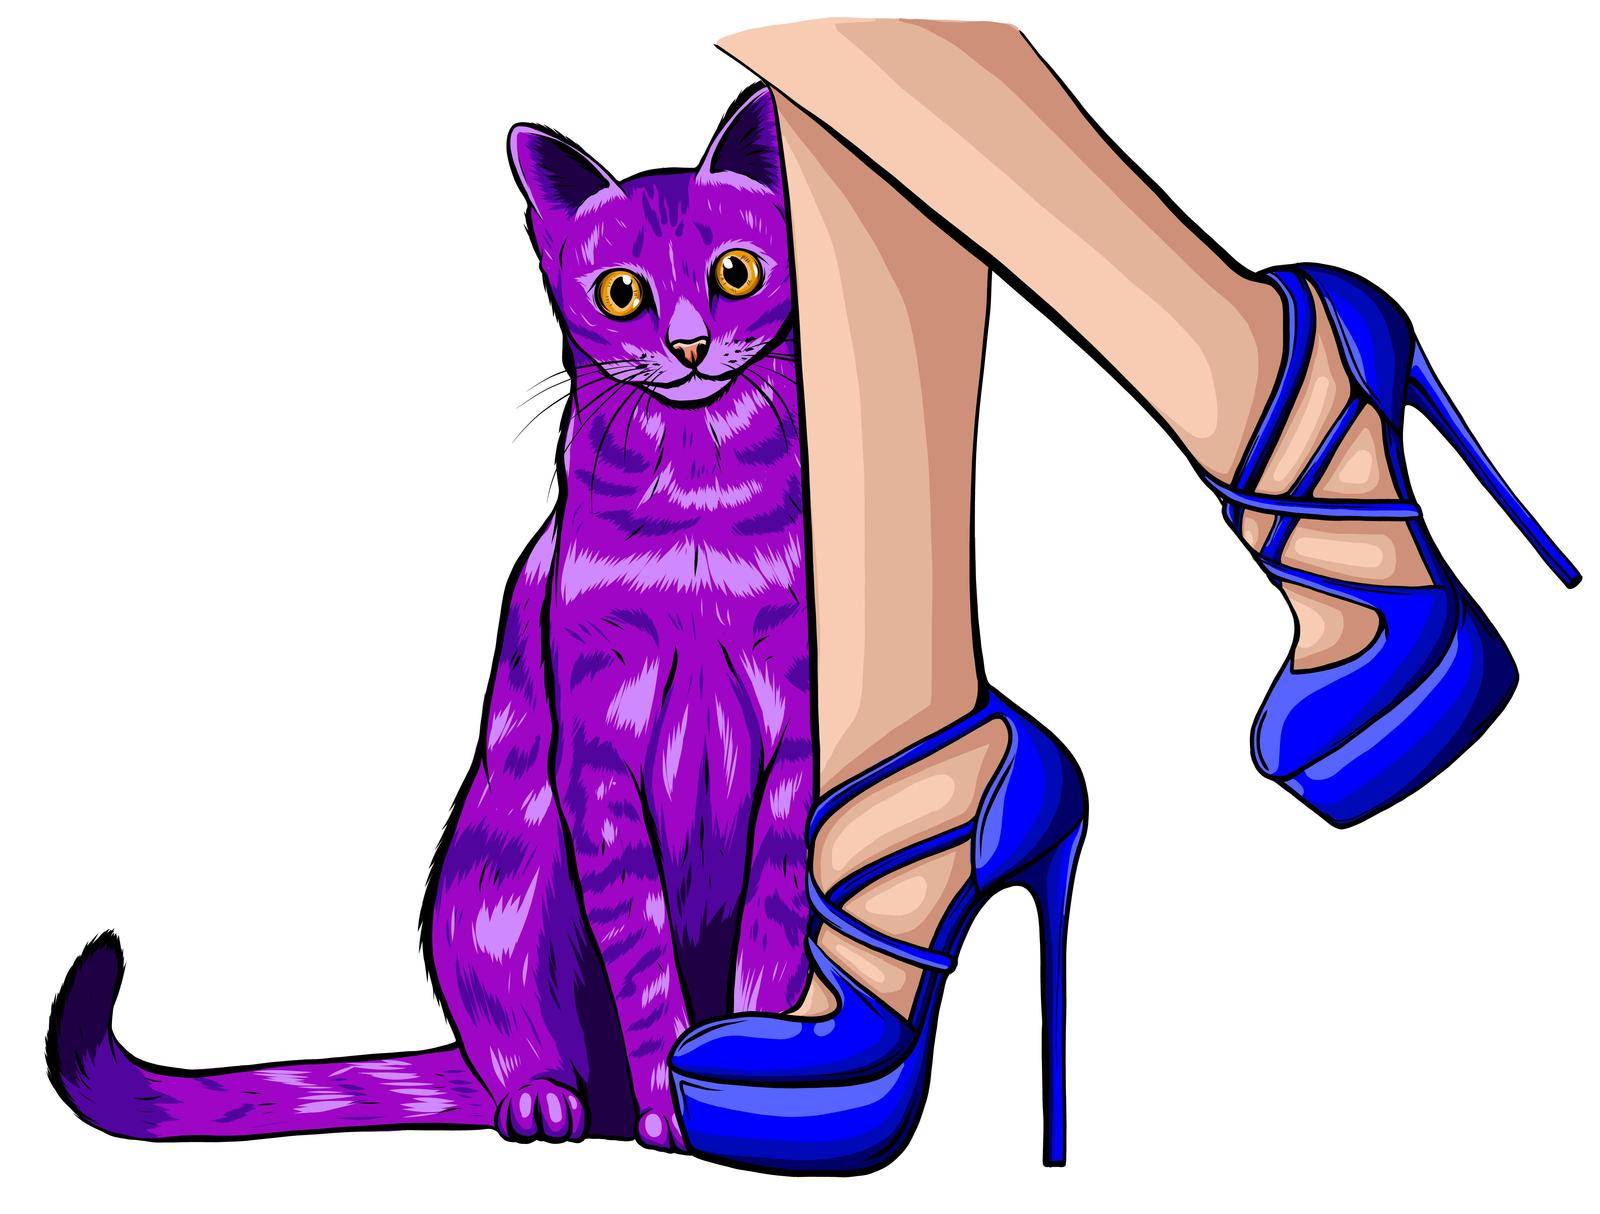 cat looking up at beautiful female legs in colorful fashionable high wedge leather sandals on white table. by dean